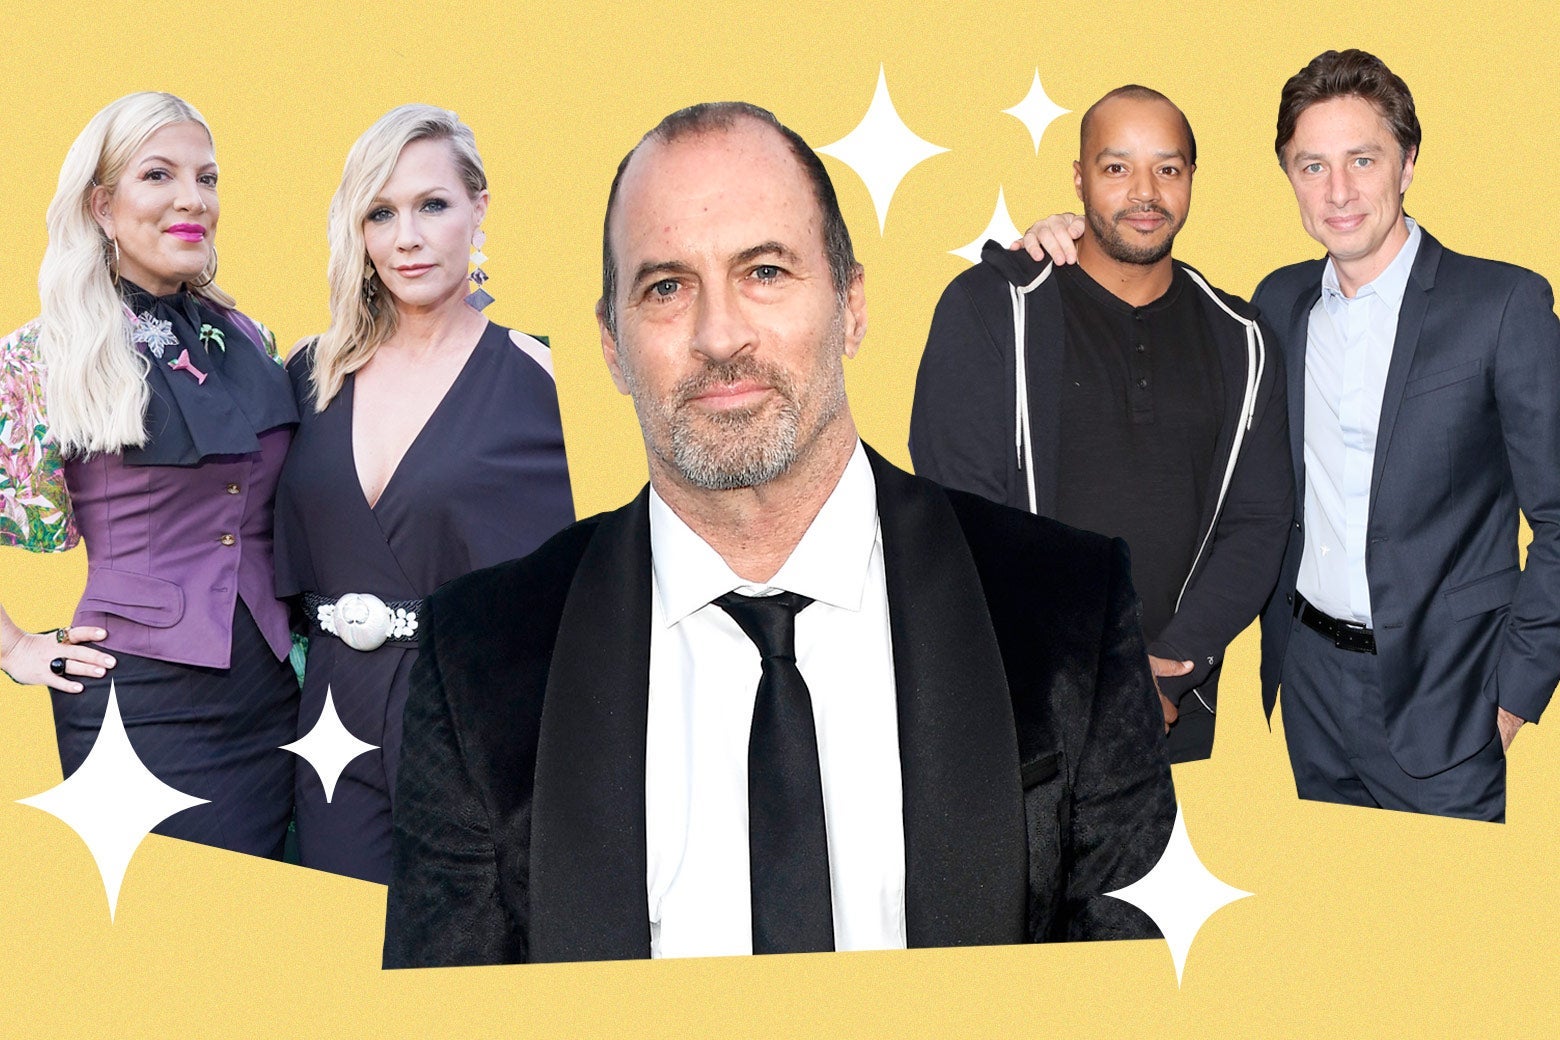 Photo collage of Scott Patterson, Tori Spelling with Jennie Garth, and Donald Faison with Zach Braff, surrounded by four-pointed stars